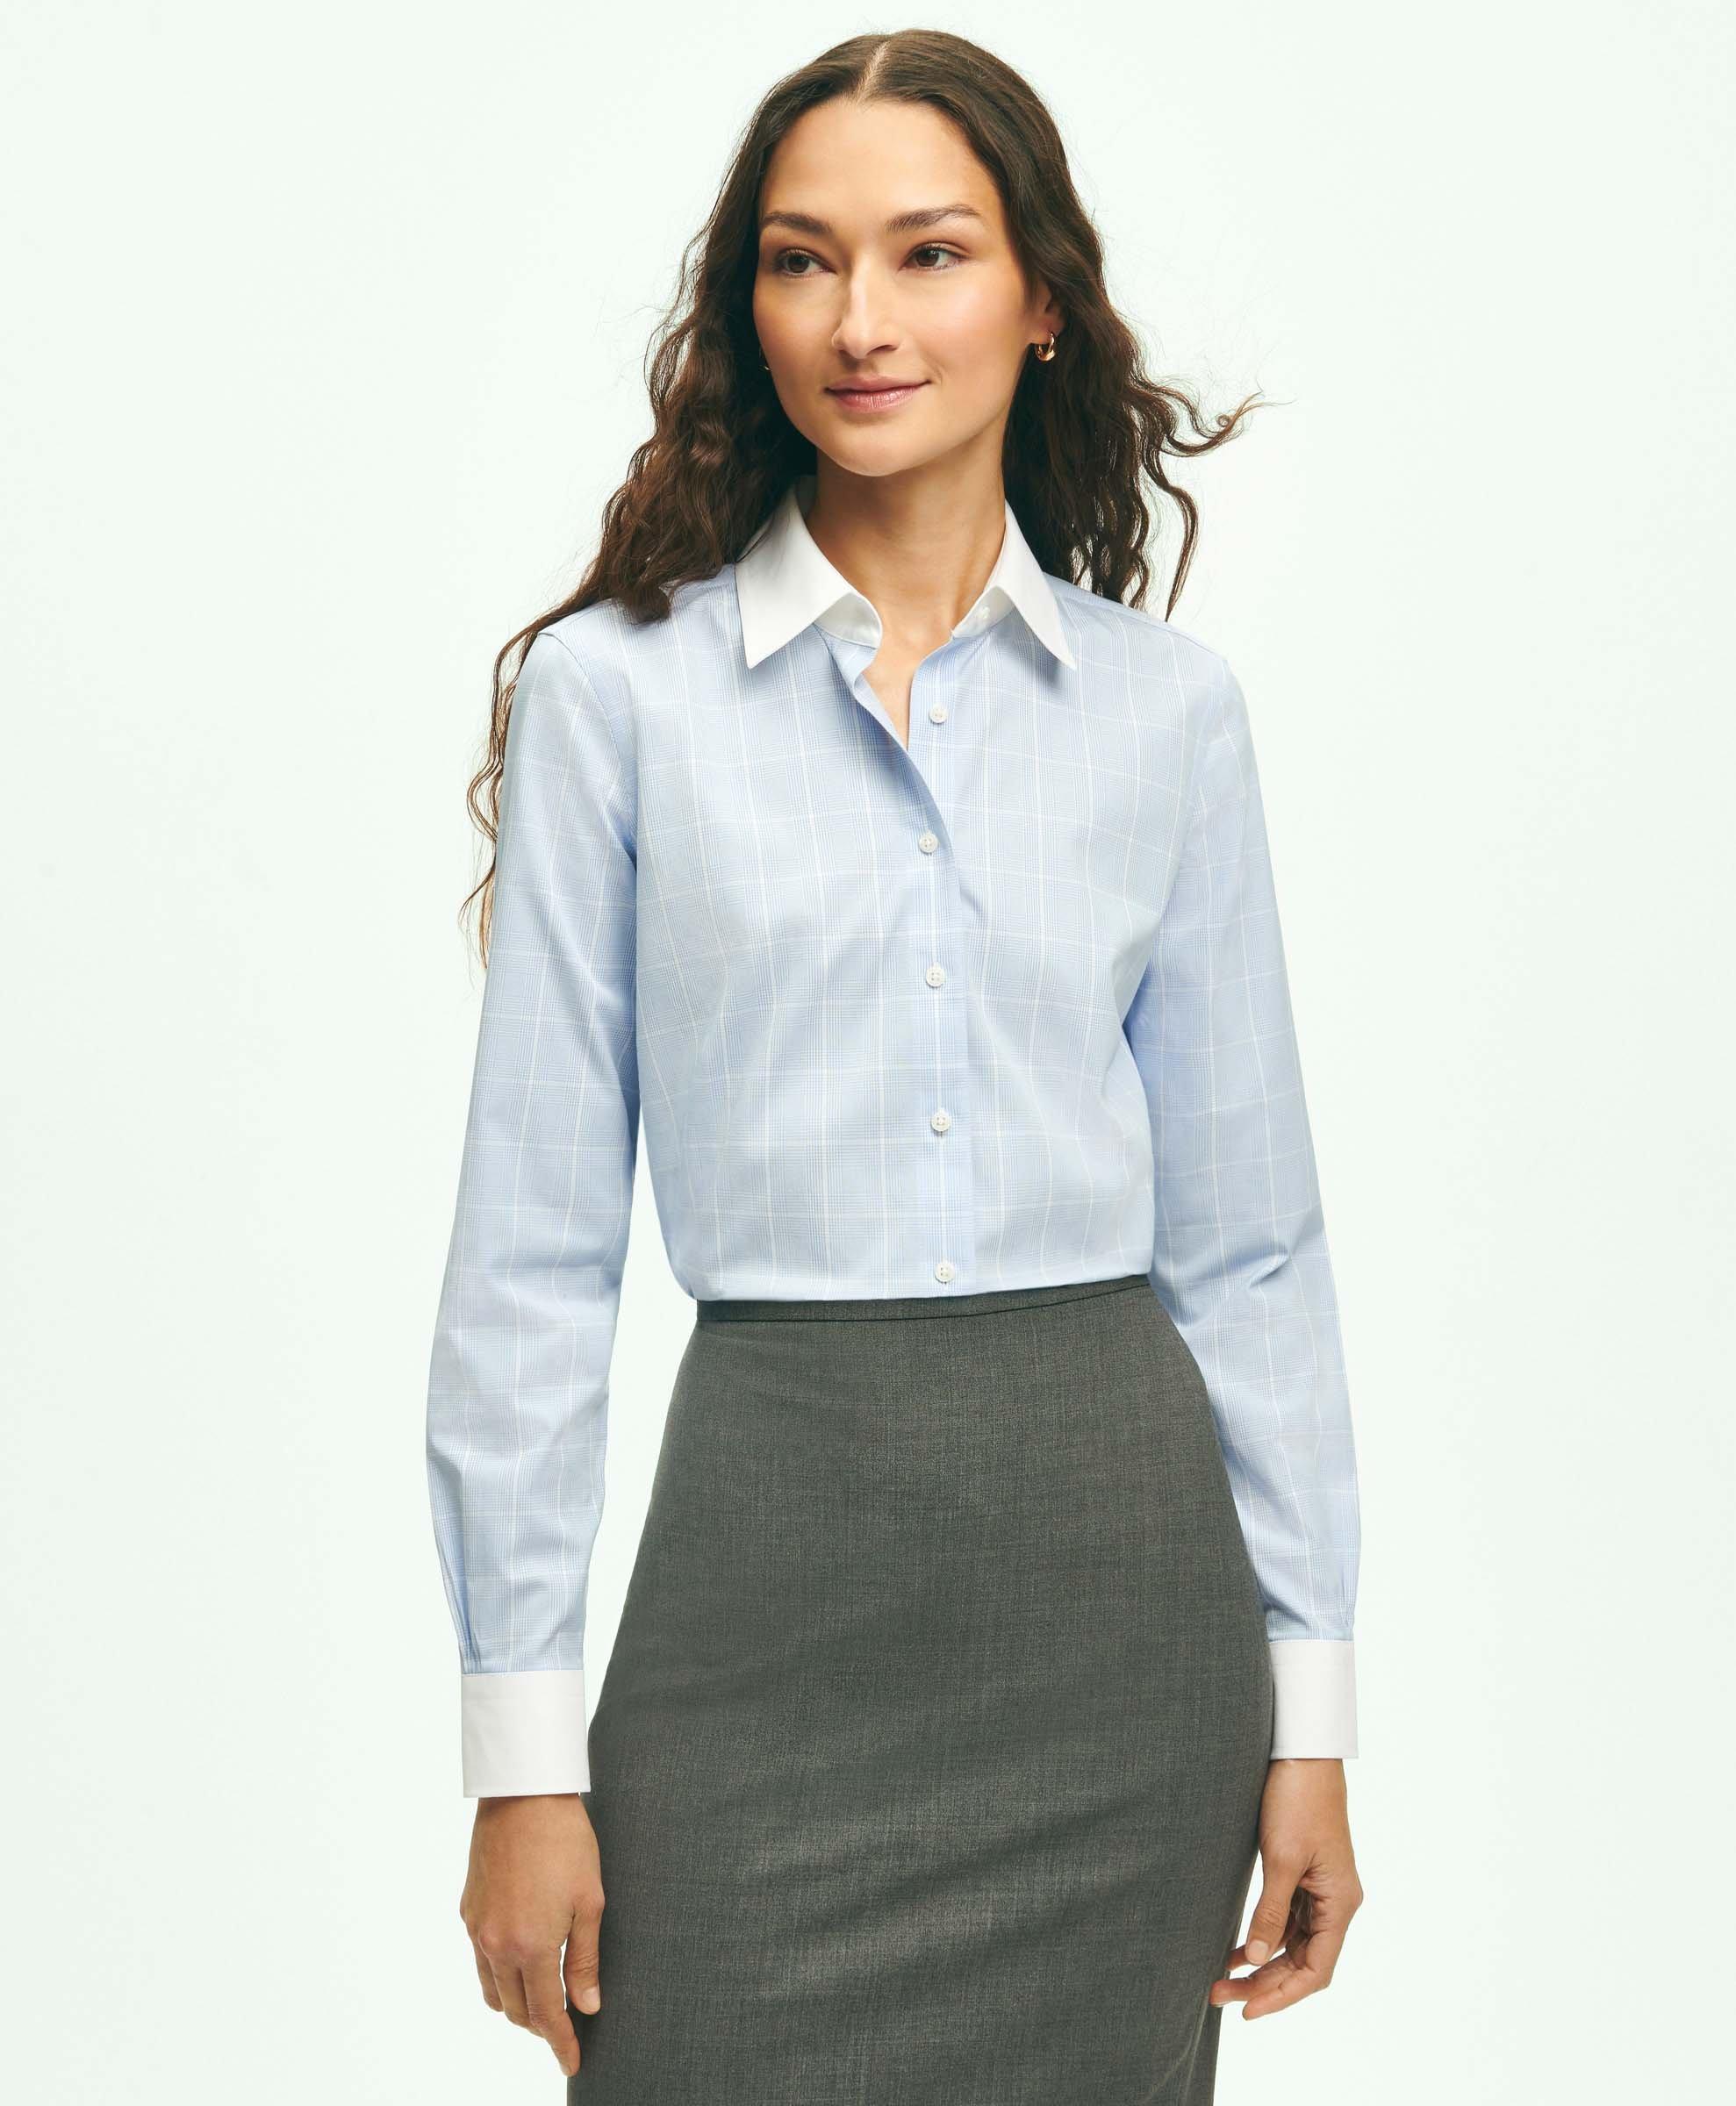 Women's White Fitted Cotton Stretch Shirt - Double Cuffs